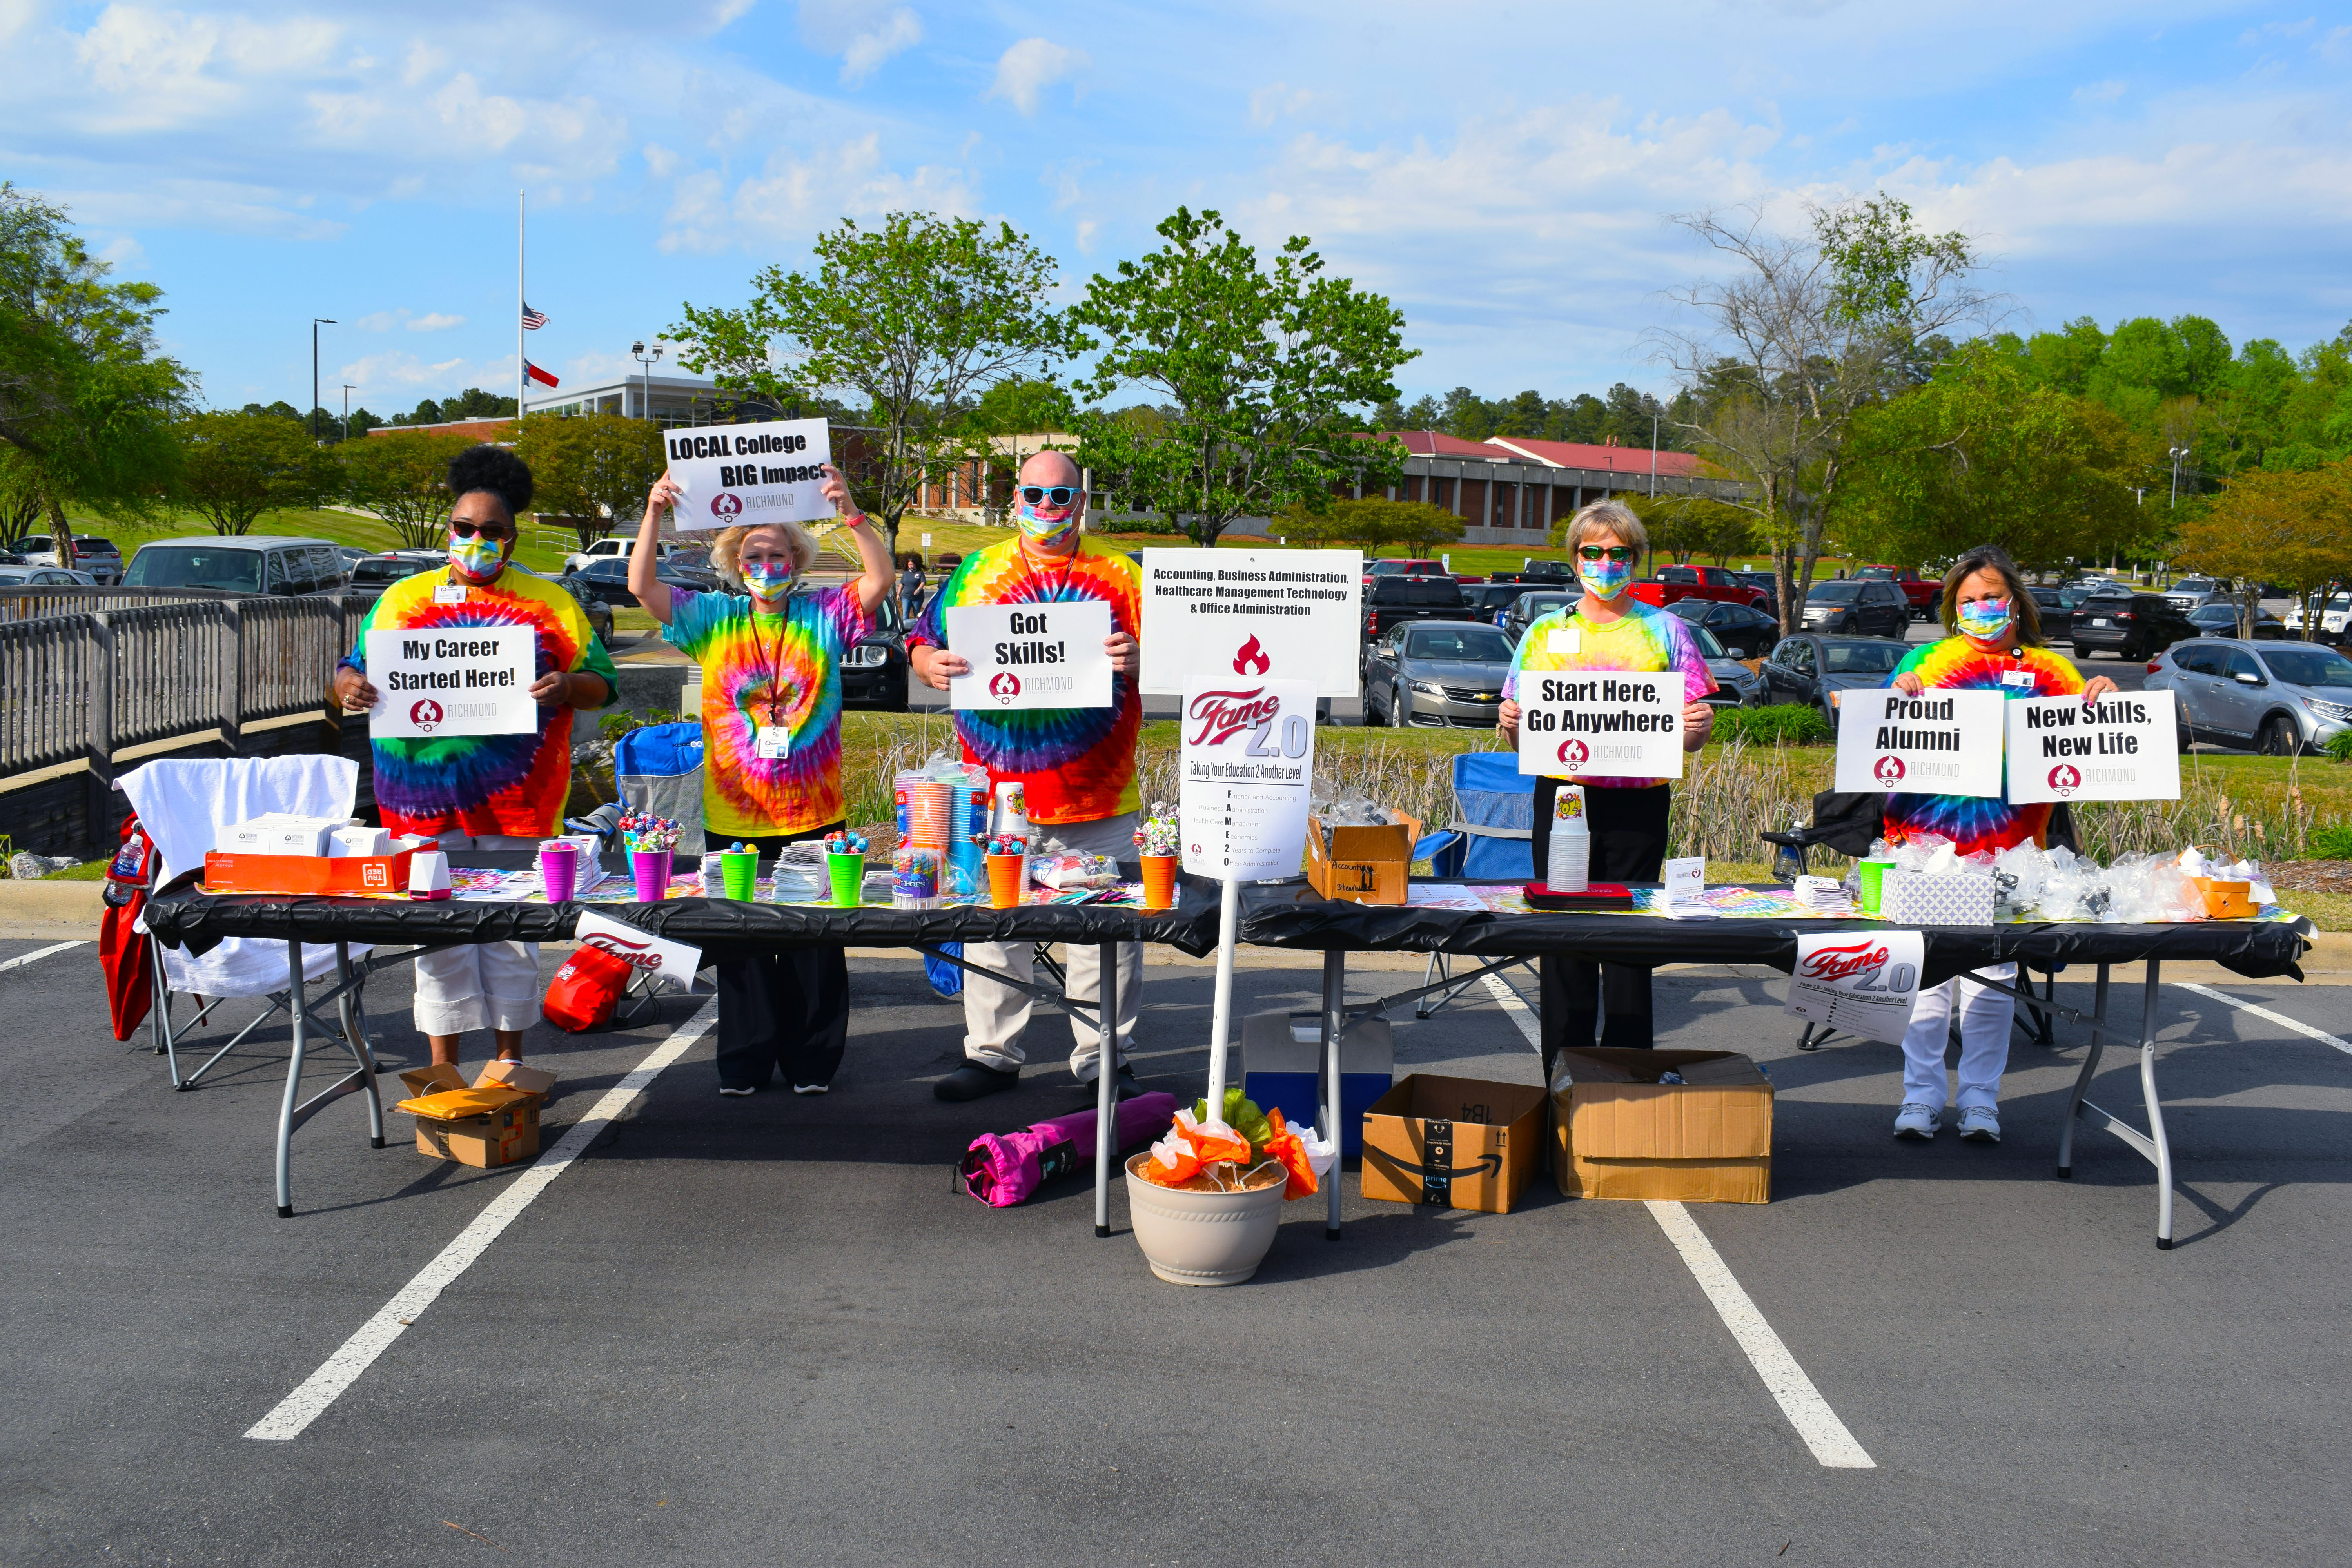 RichmondCC instructors in tye-dye shirts and masks stand at a table holding various signs about choosing RichmondCC.